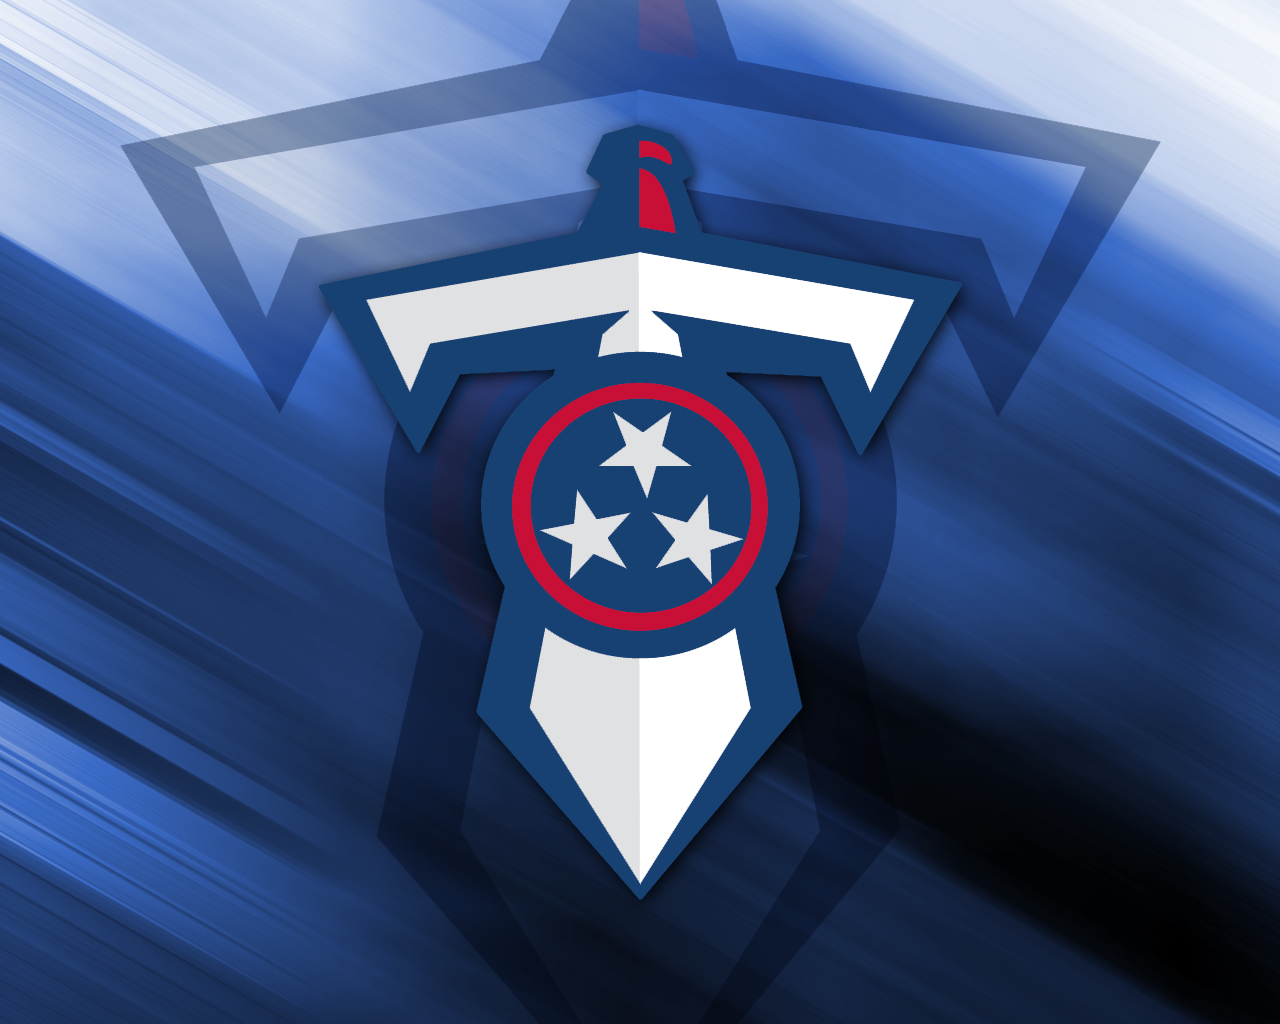 High Resolution Wallpaper | Tennessee Titans 1280x1024 px